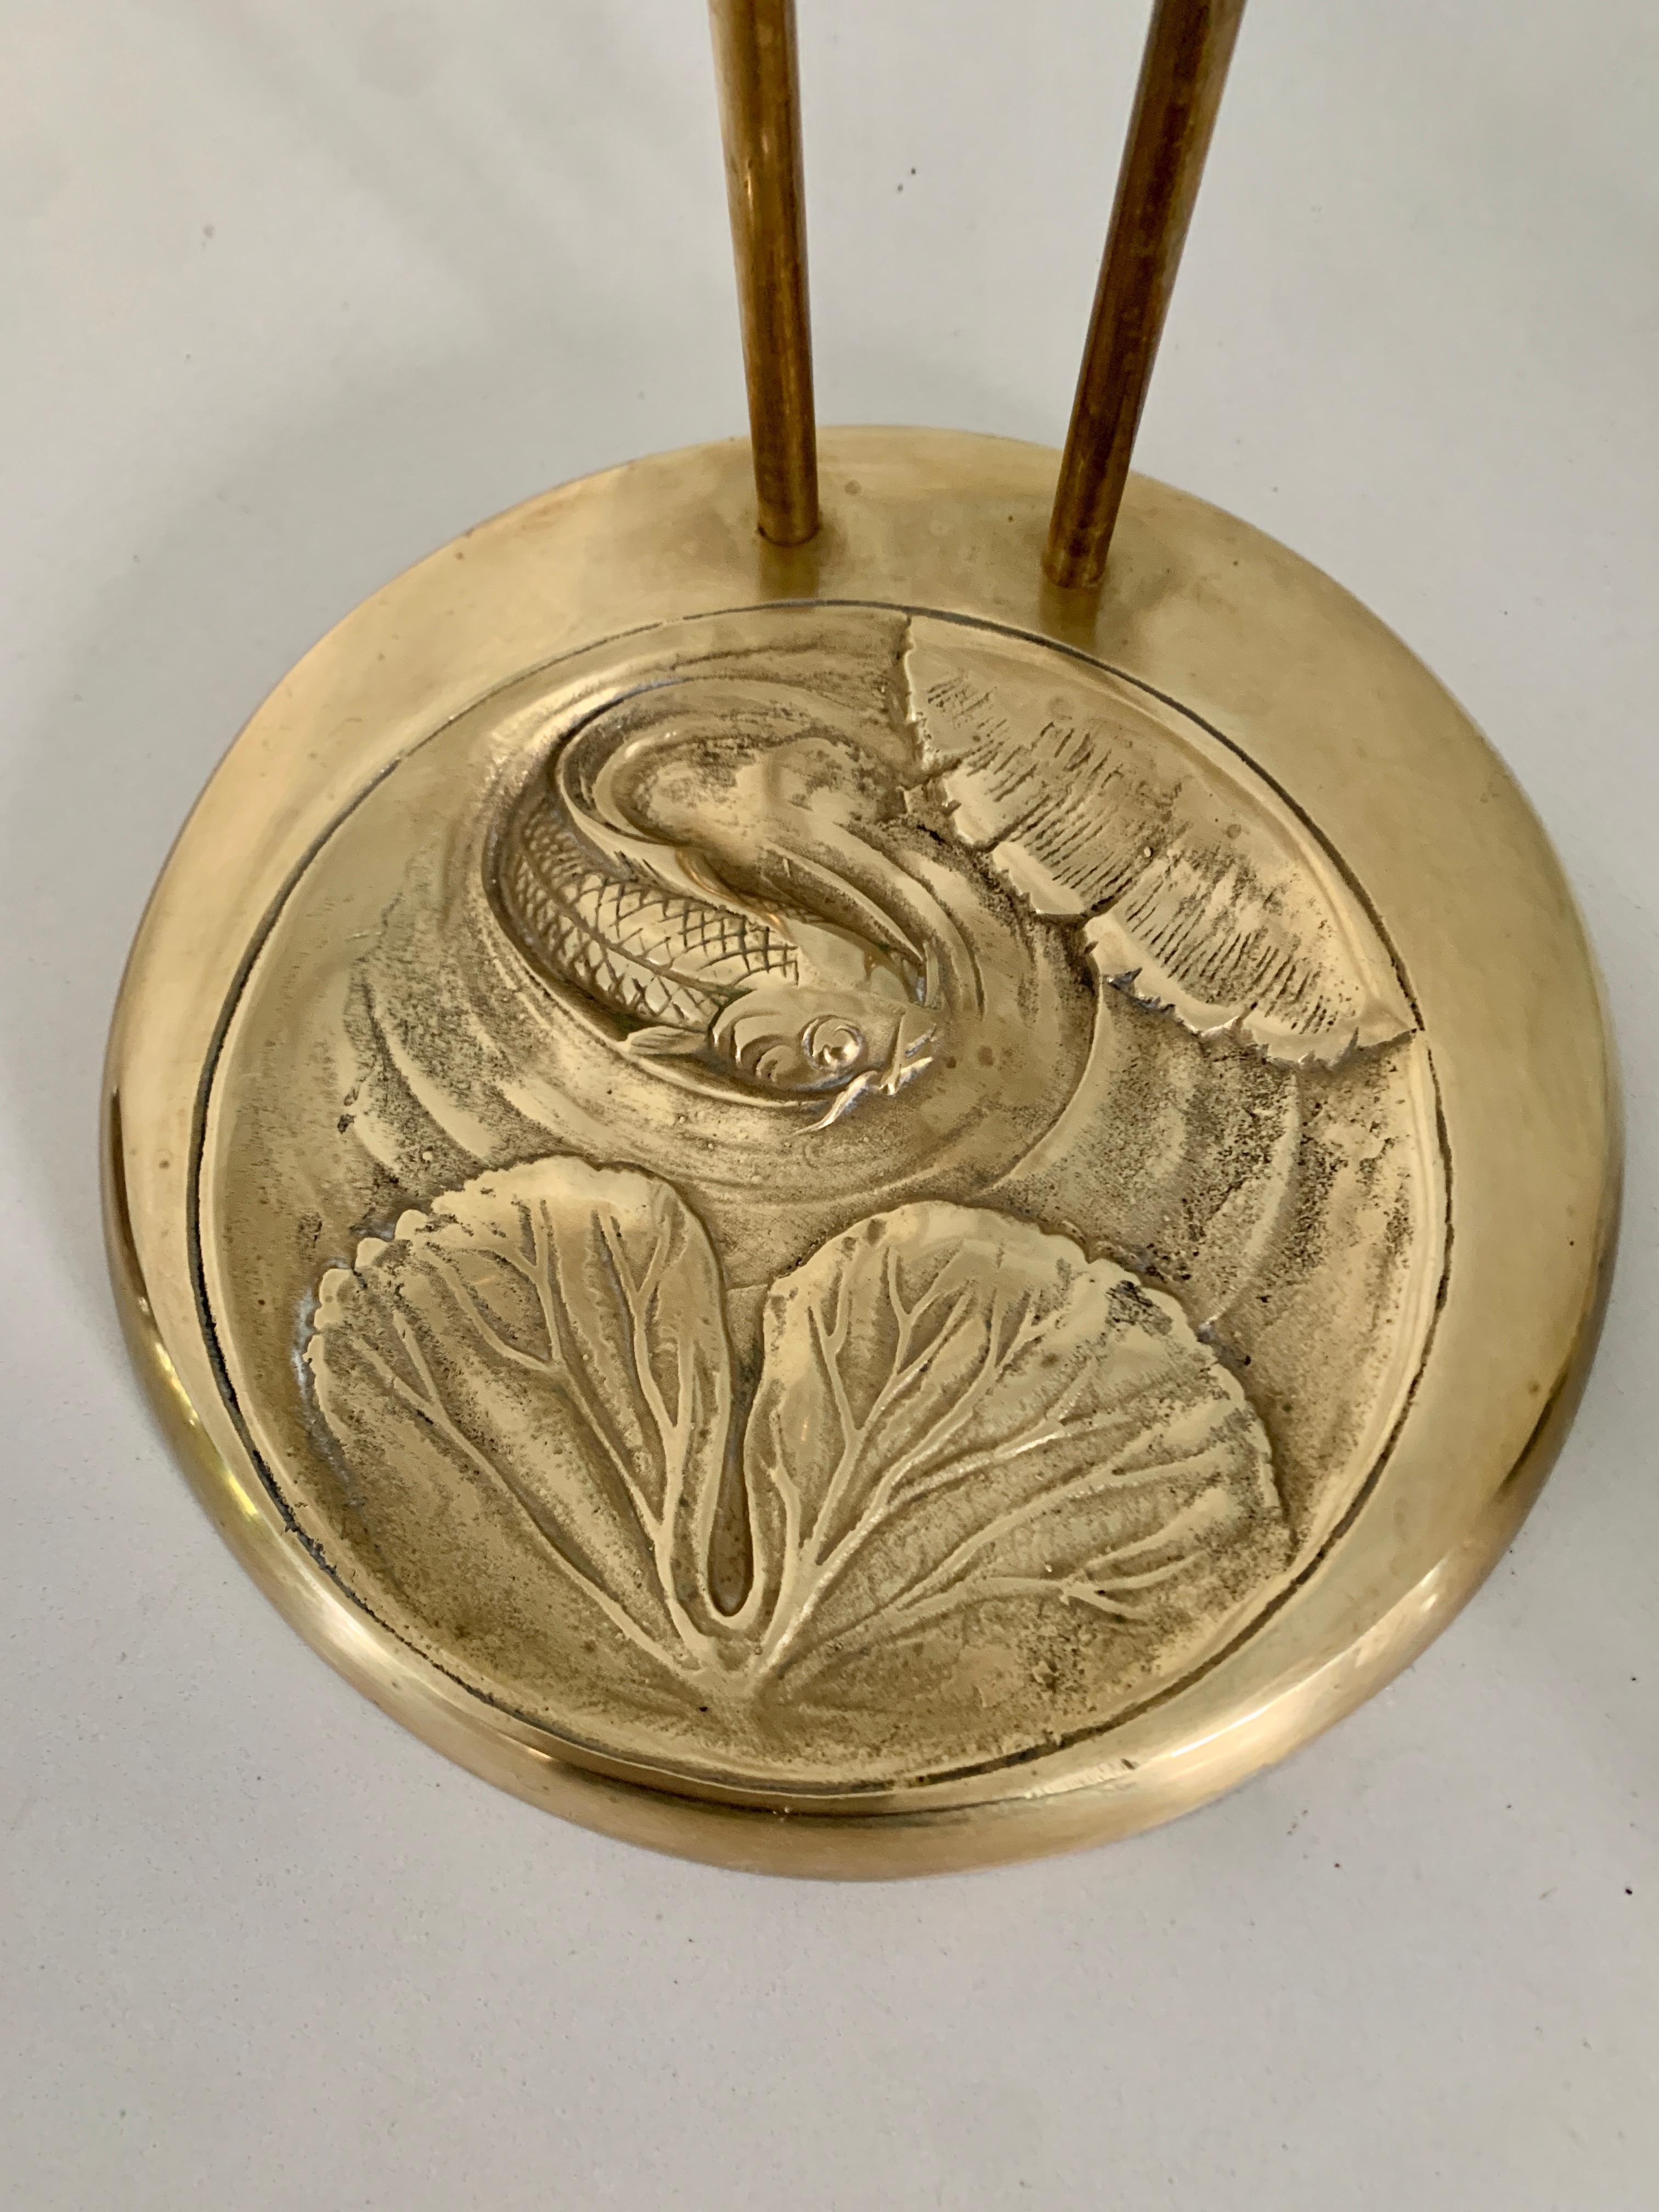 A wonderful and gracefully designed Brass Umbrella Stand in the shape of an arched Crane. The piece has a drip pan with a creative repousse swirl of water and Koi. A compliant to any entry or commercial space.
housewarming gift, Birthday gift.